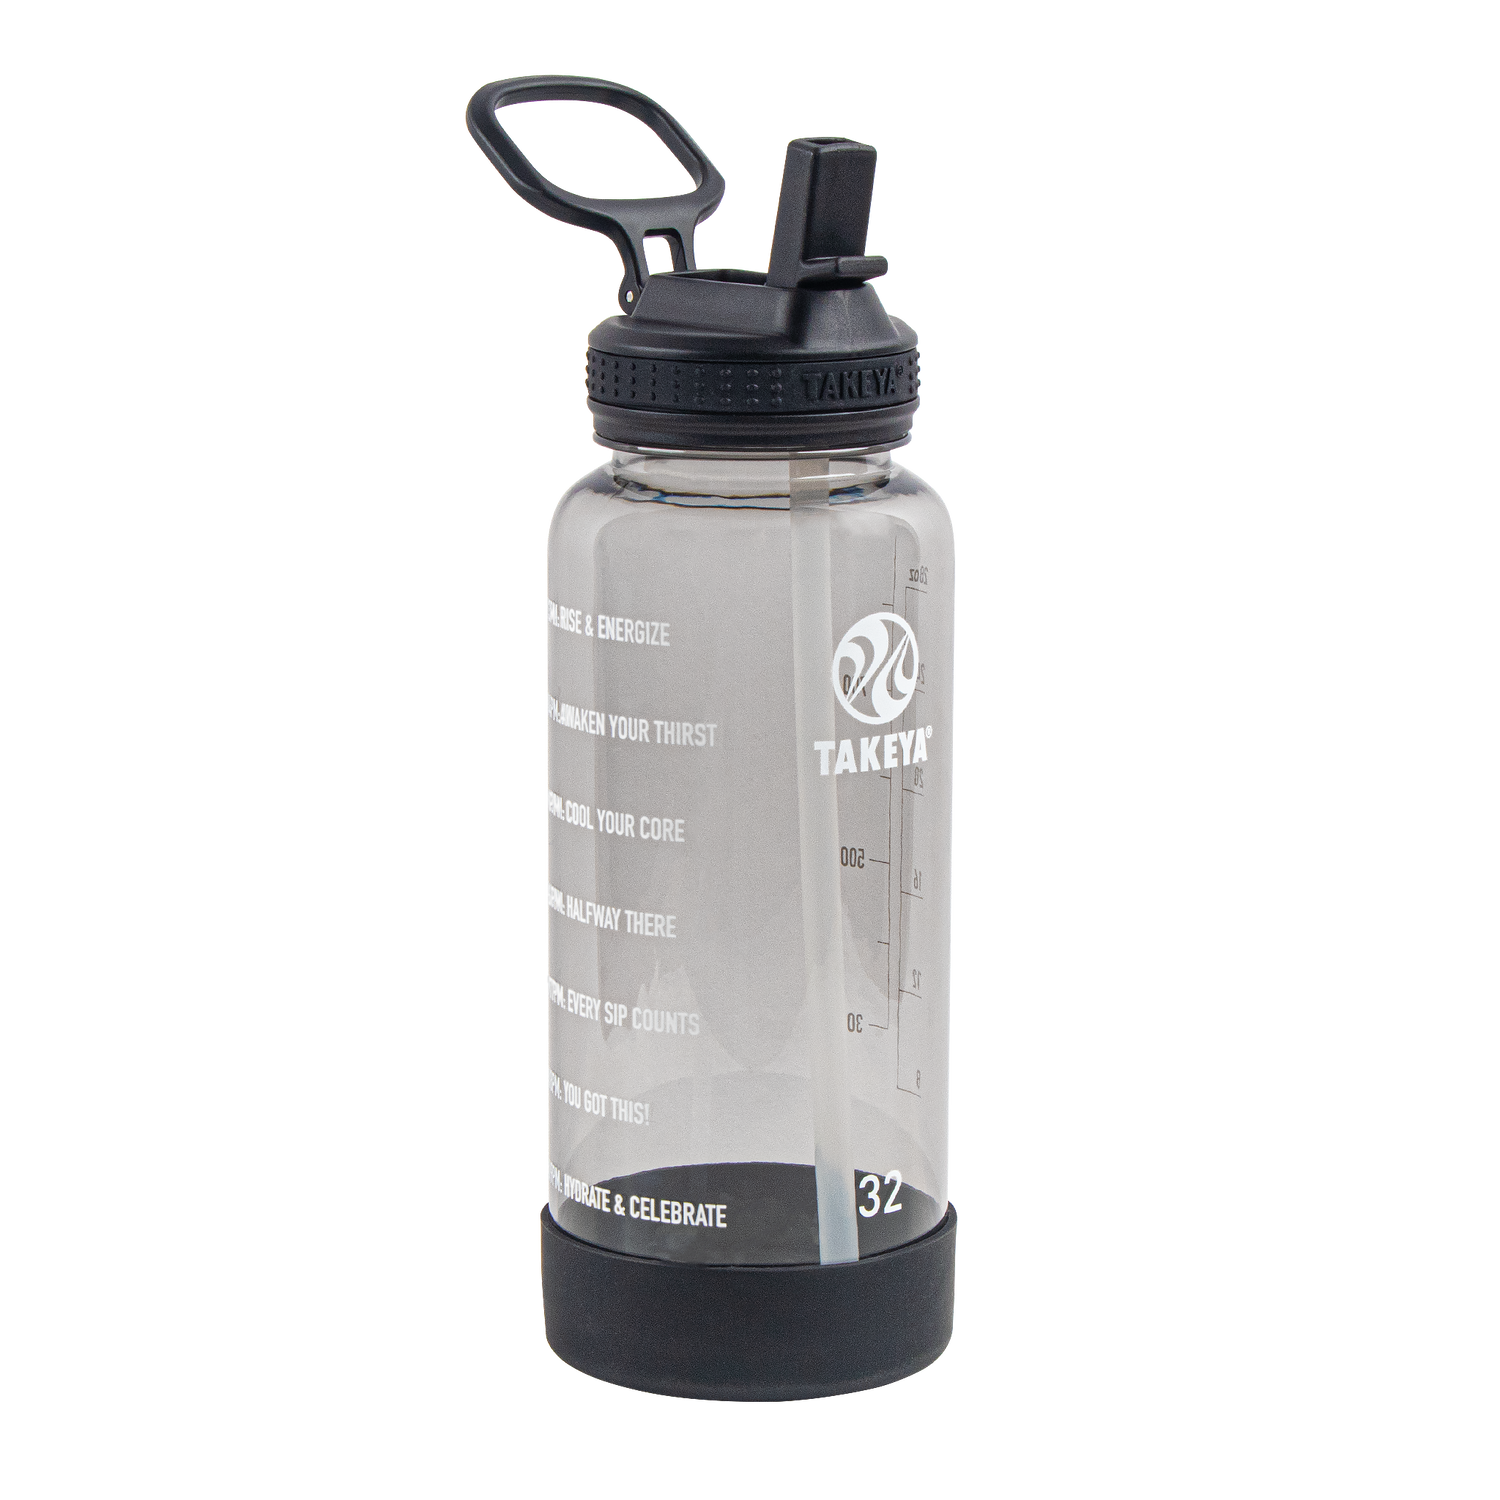 Wholesale Wide Mouth Water Bottles with Straw Lid 32 oz